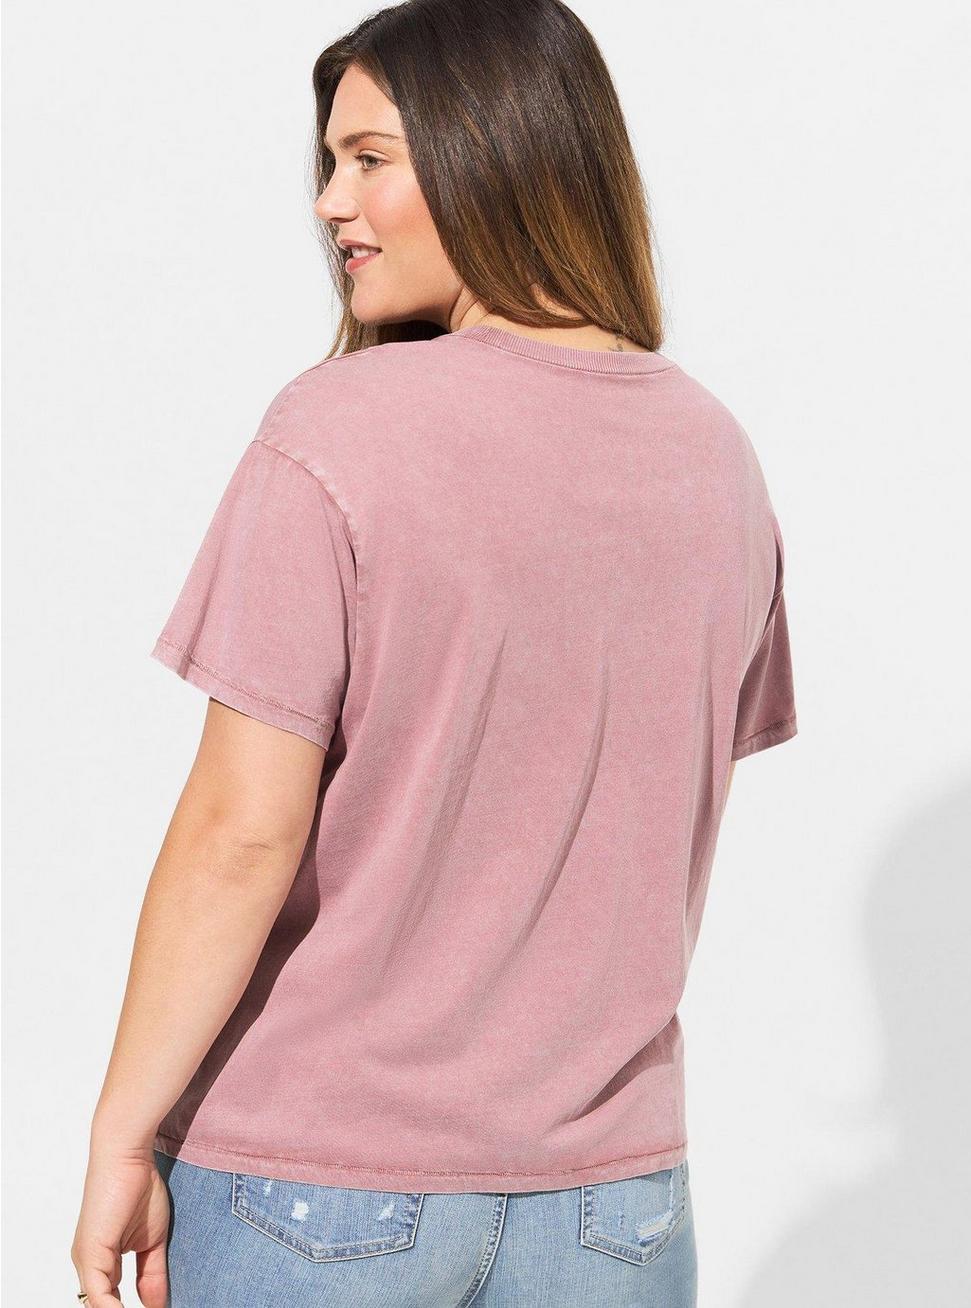 Relaxed Vintage Cotton Jersey Crew Neck Pocket Tee, ROSE TAUPE, alternate